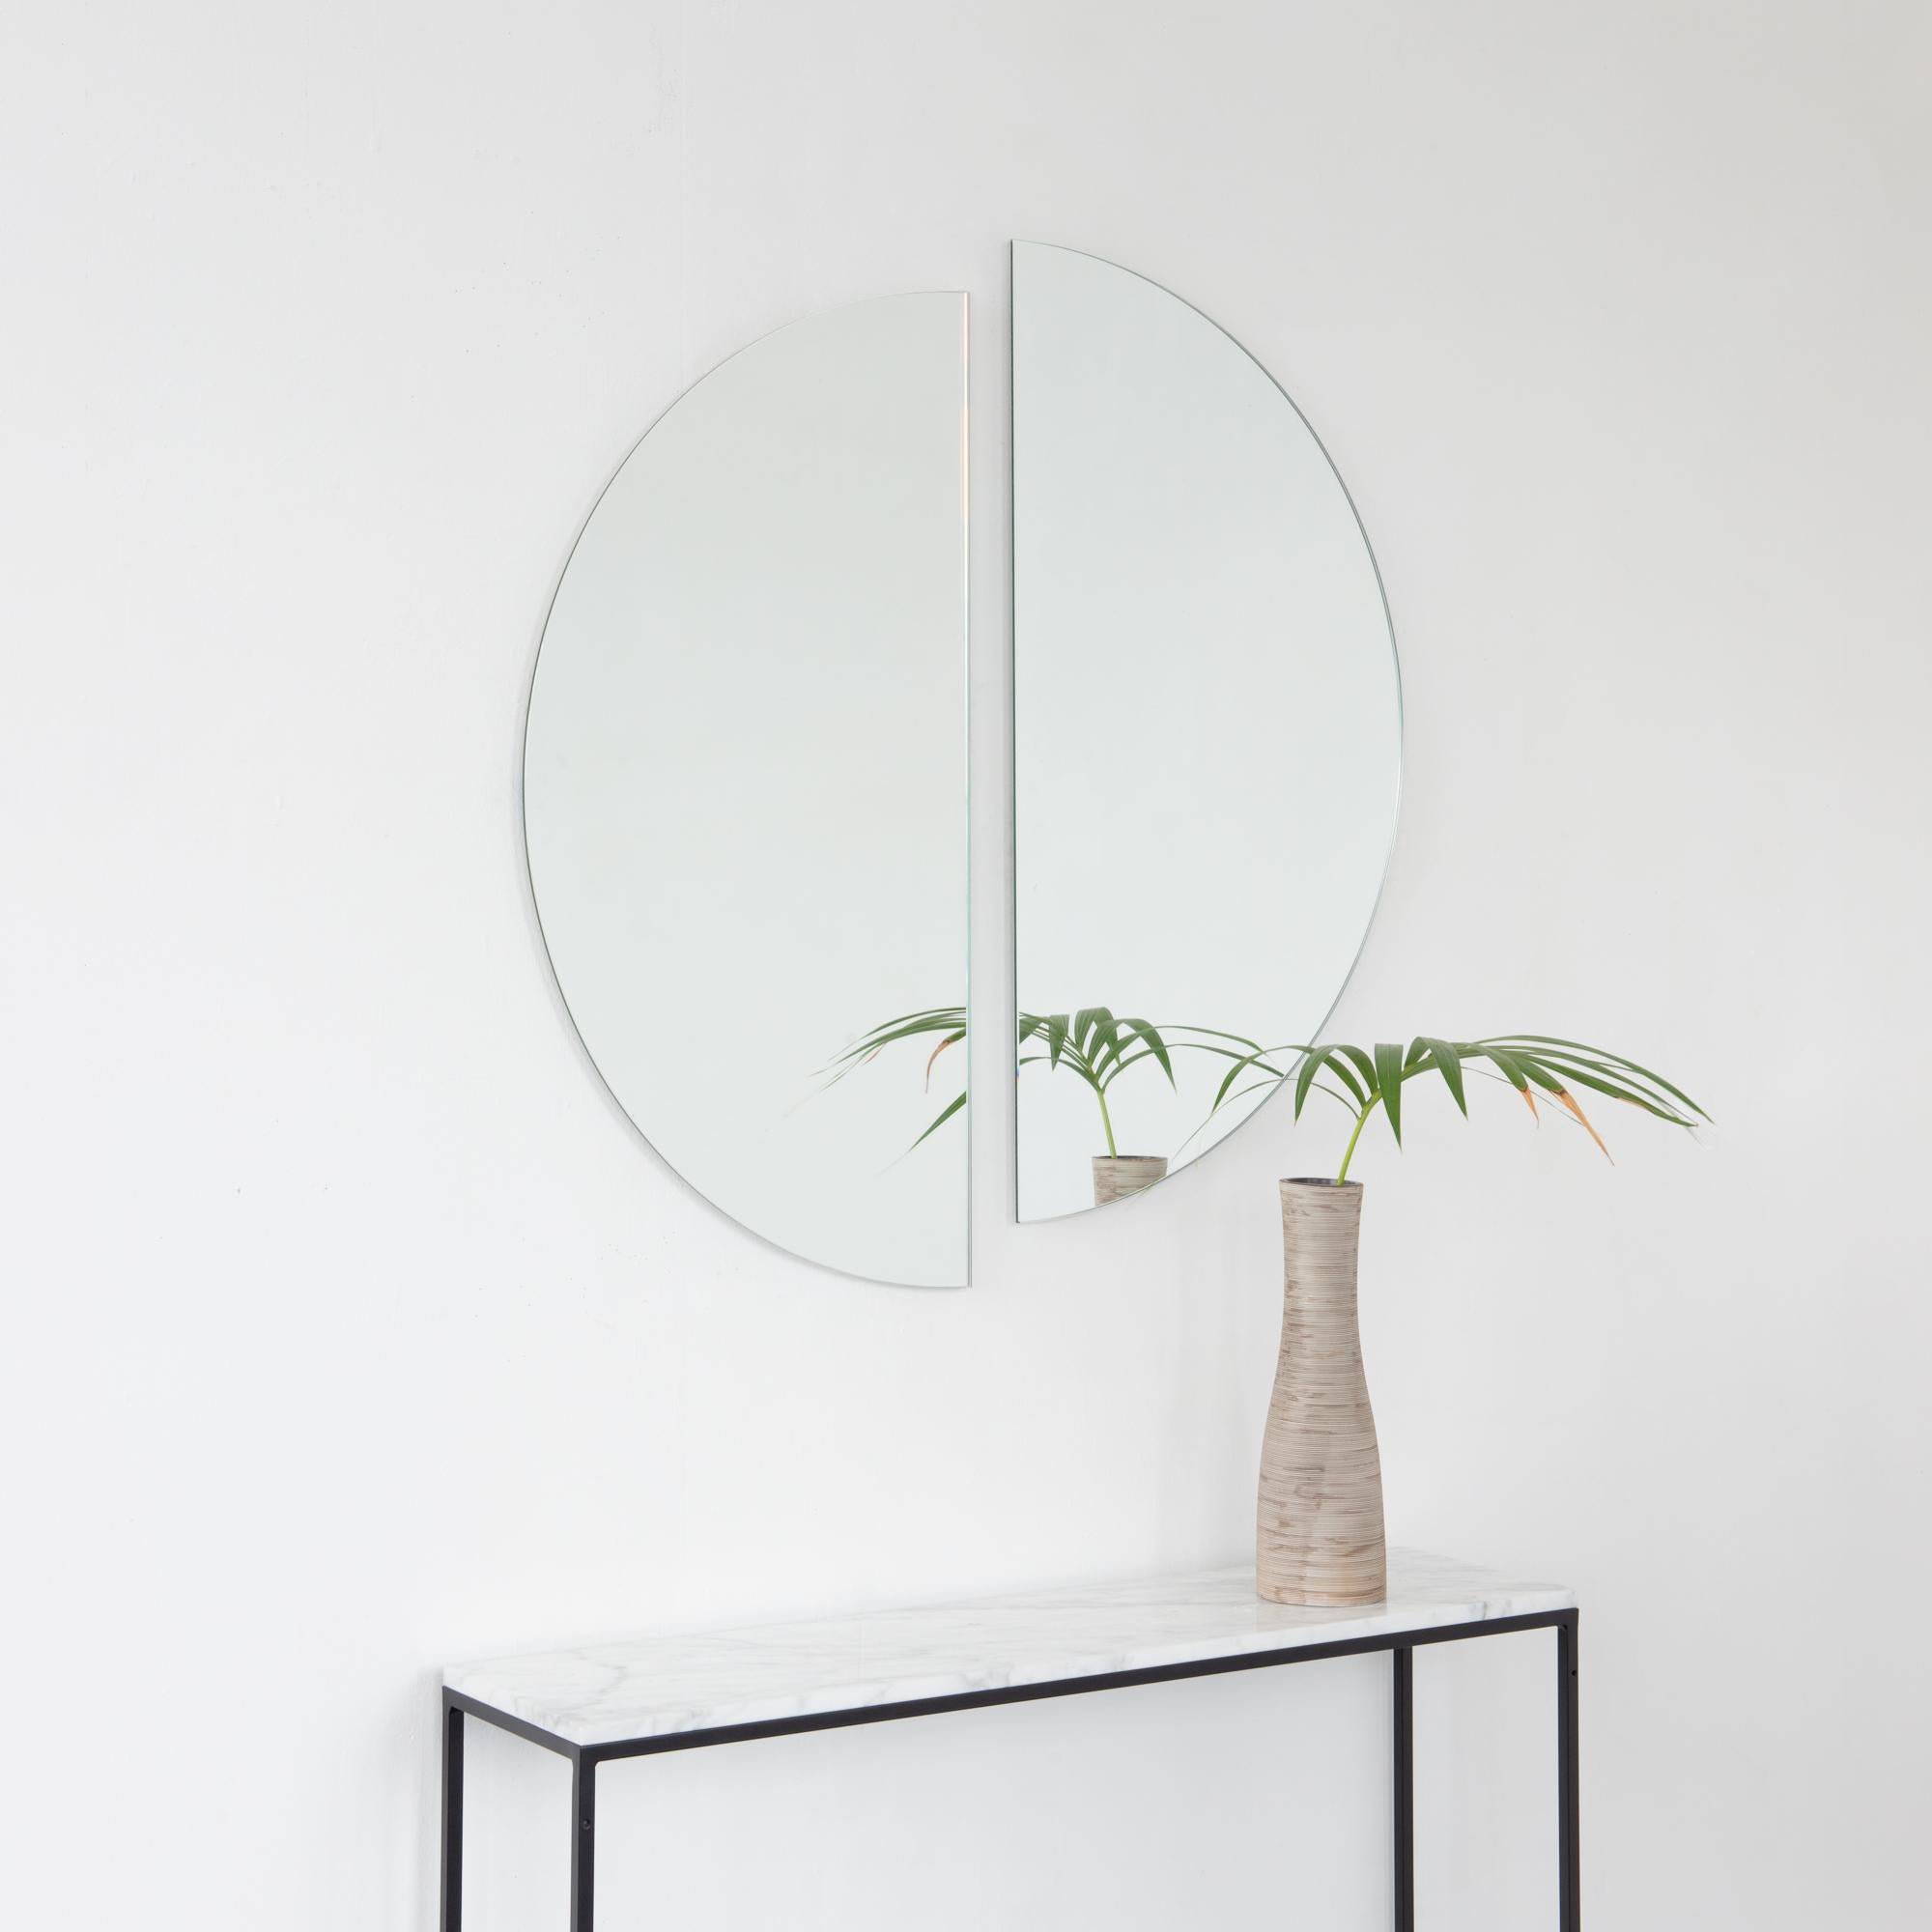 Set of two charming and minimalist Luna™ half-moon frameless mirrors with a floating effect. Fitted with a quality hanging system for a flexible installation in 4 different directions. Designed and made in London, UK.

Our mirrors are designed with